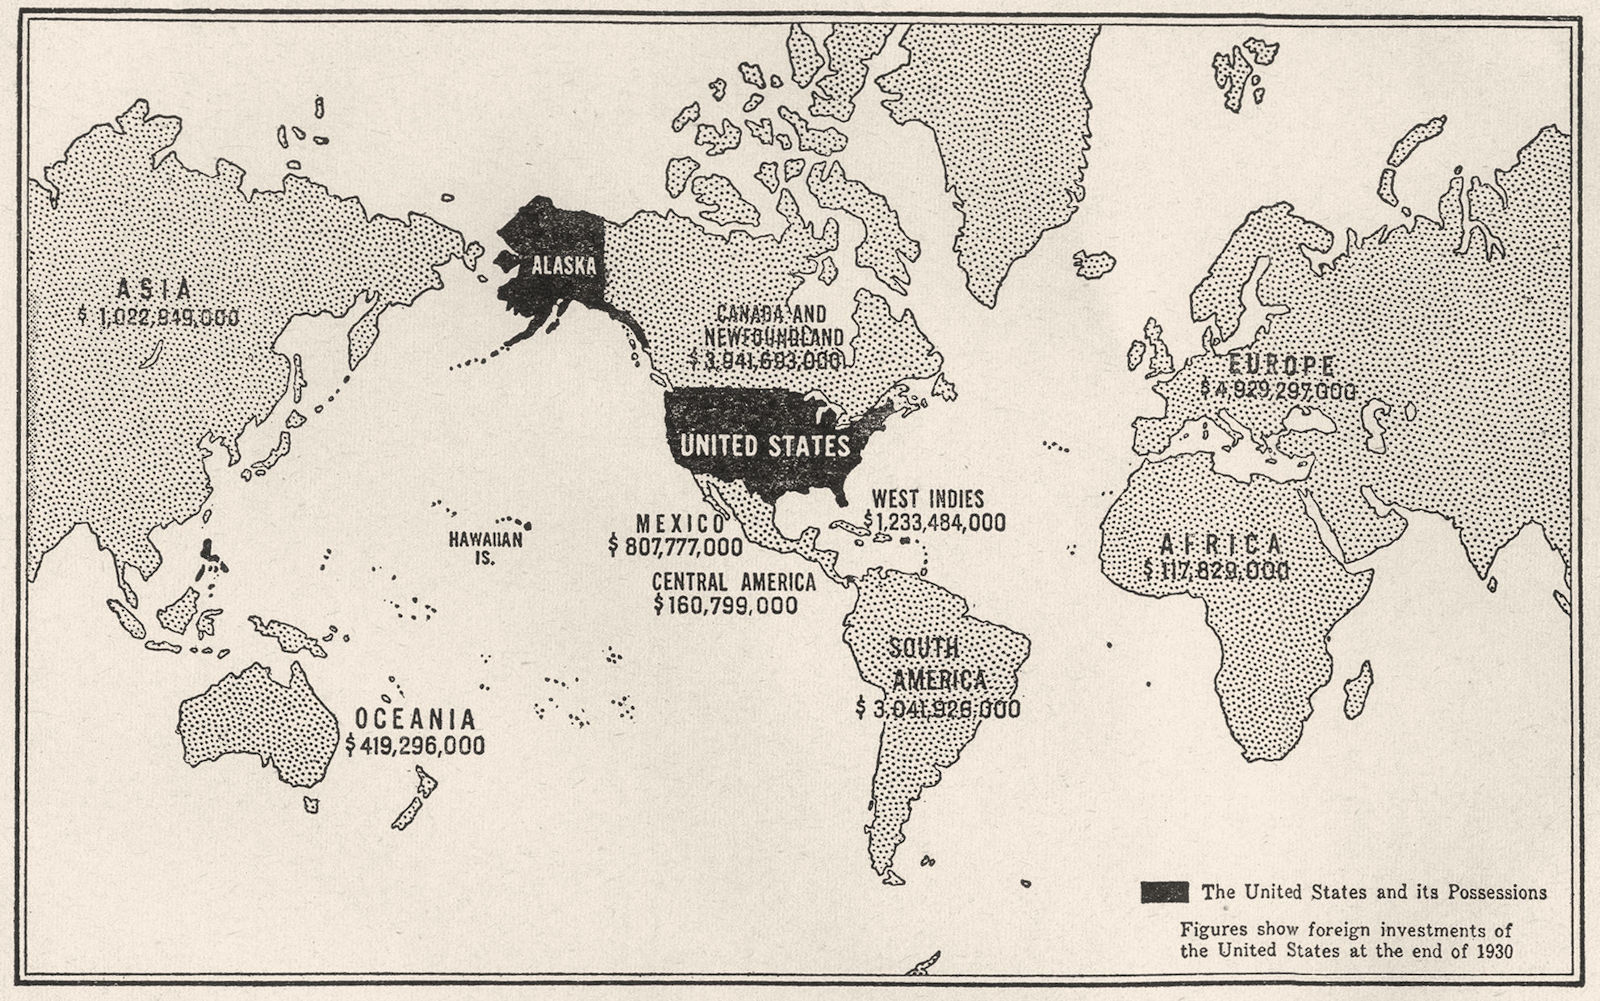 WORLD. American foreign interests, possessions investment 1930, sketch map 1942